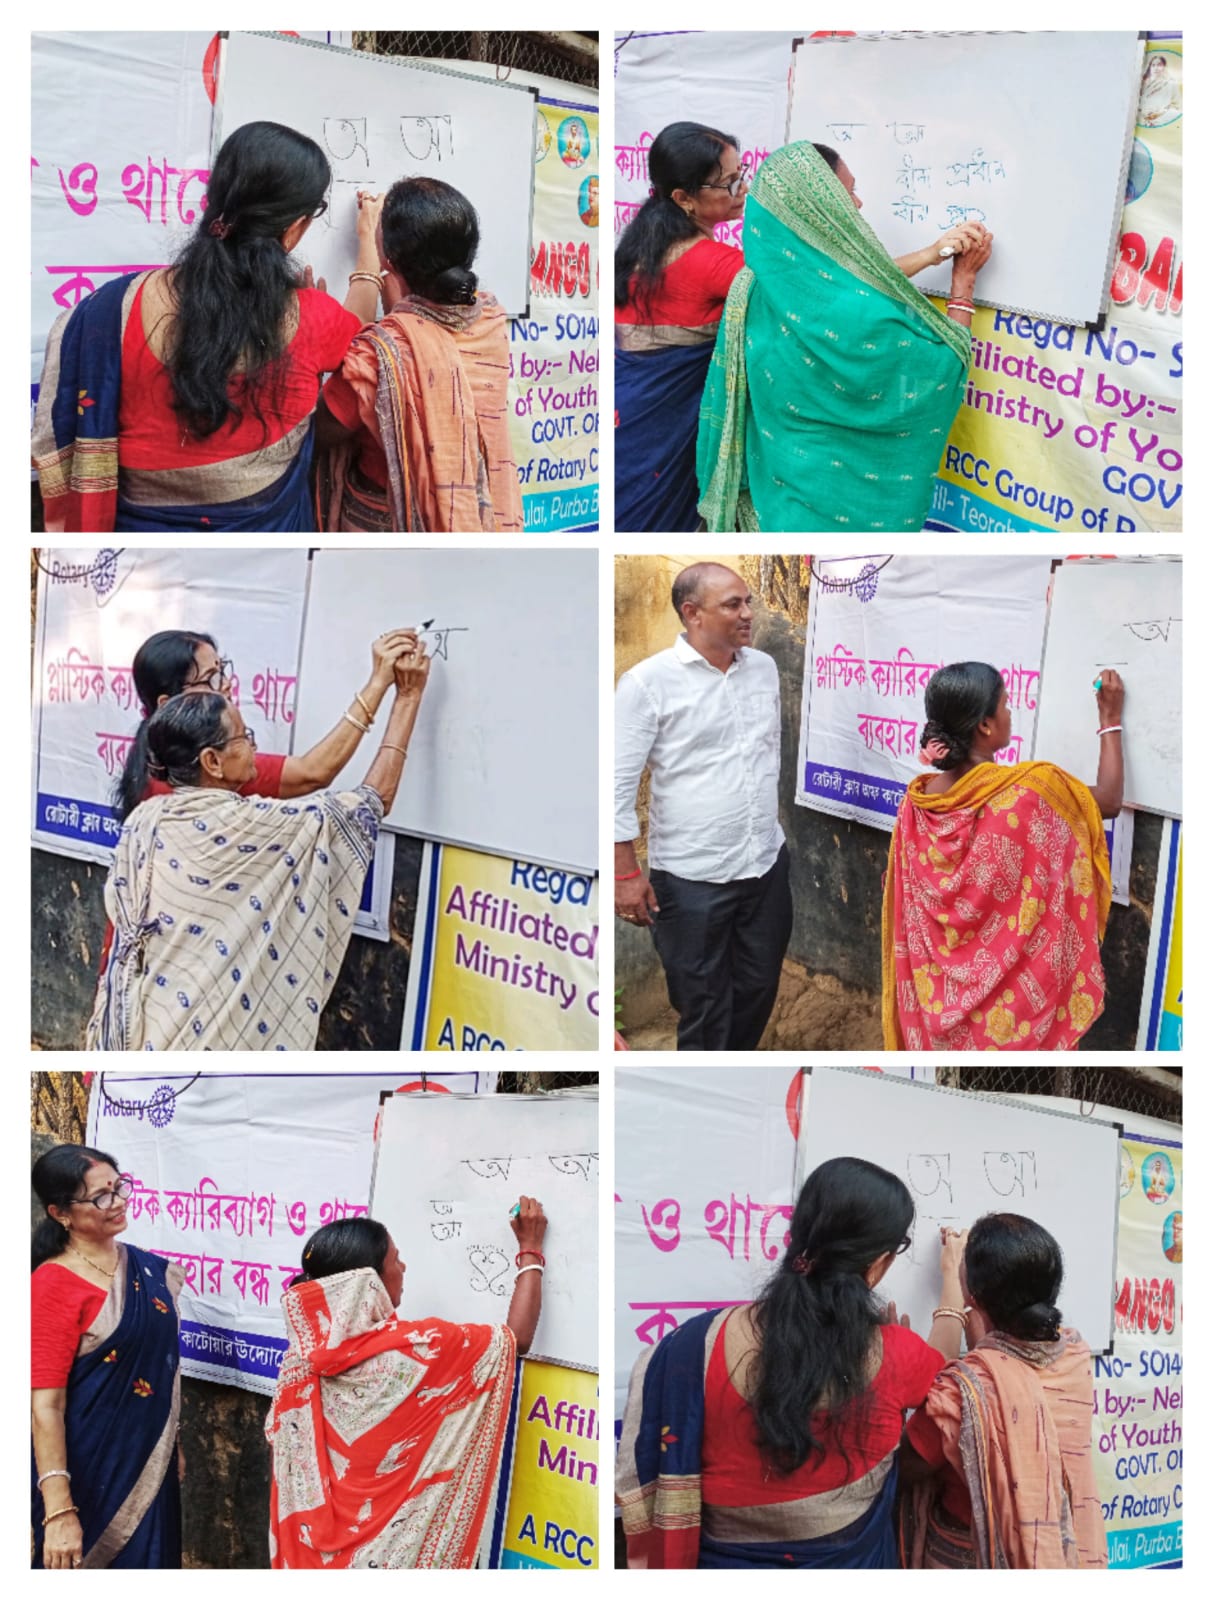 Inauguration of Adult Literacy Centre by Rotary Club of Katwa, Zone lV, RID 3240 at Tewrah, KETUGRAM on 18th September’22 with the support of RCC Group TEWRAH BANGOLOK SANSKRITI where 30 Adults joined today in the Adult Literacy Class.